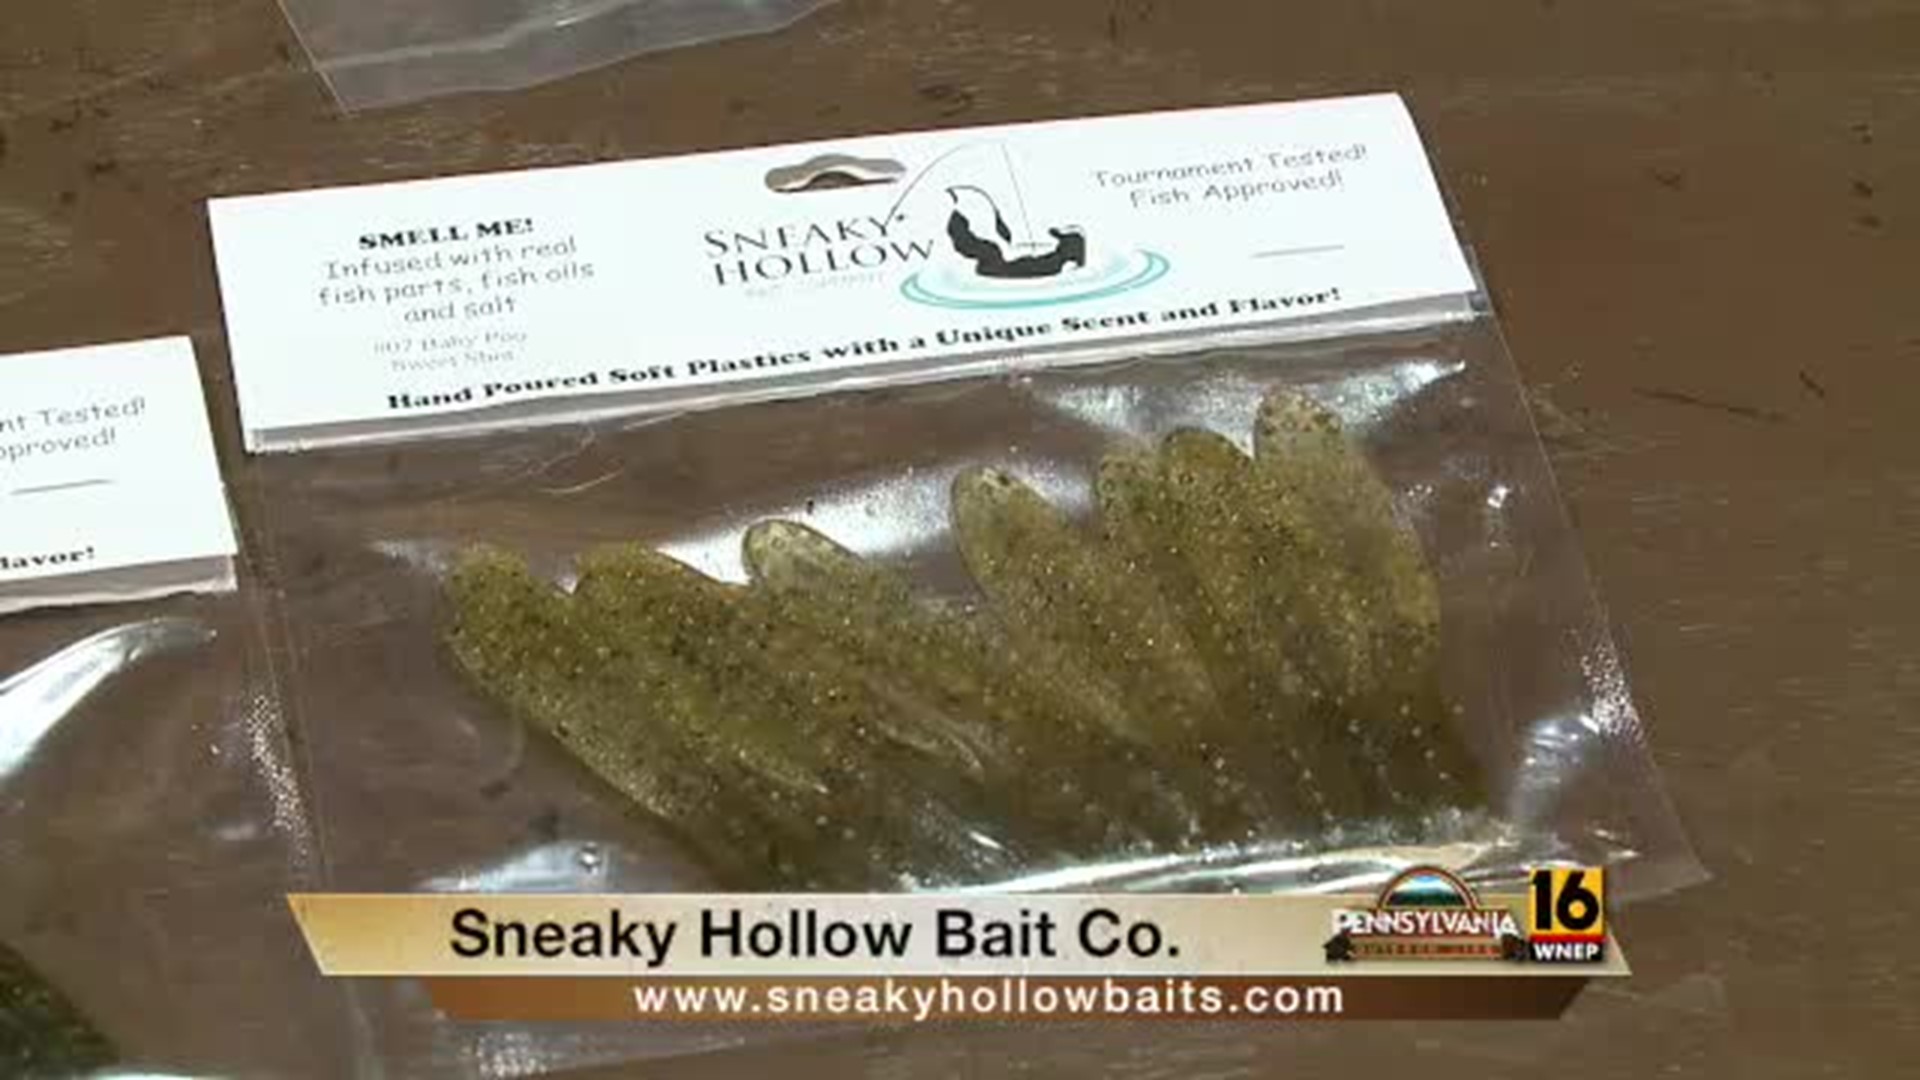 Sneaky Hollow Bait Company Product Giveaway